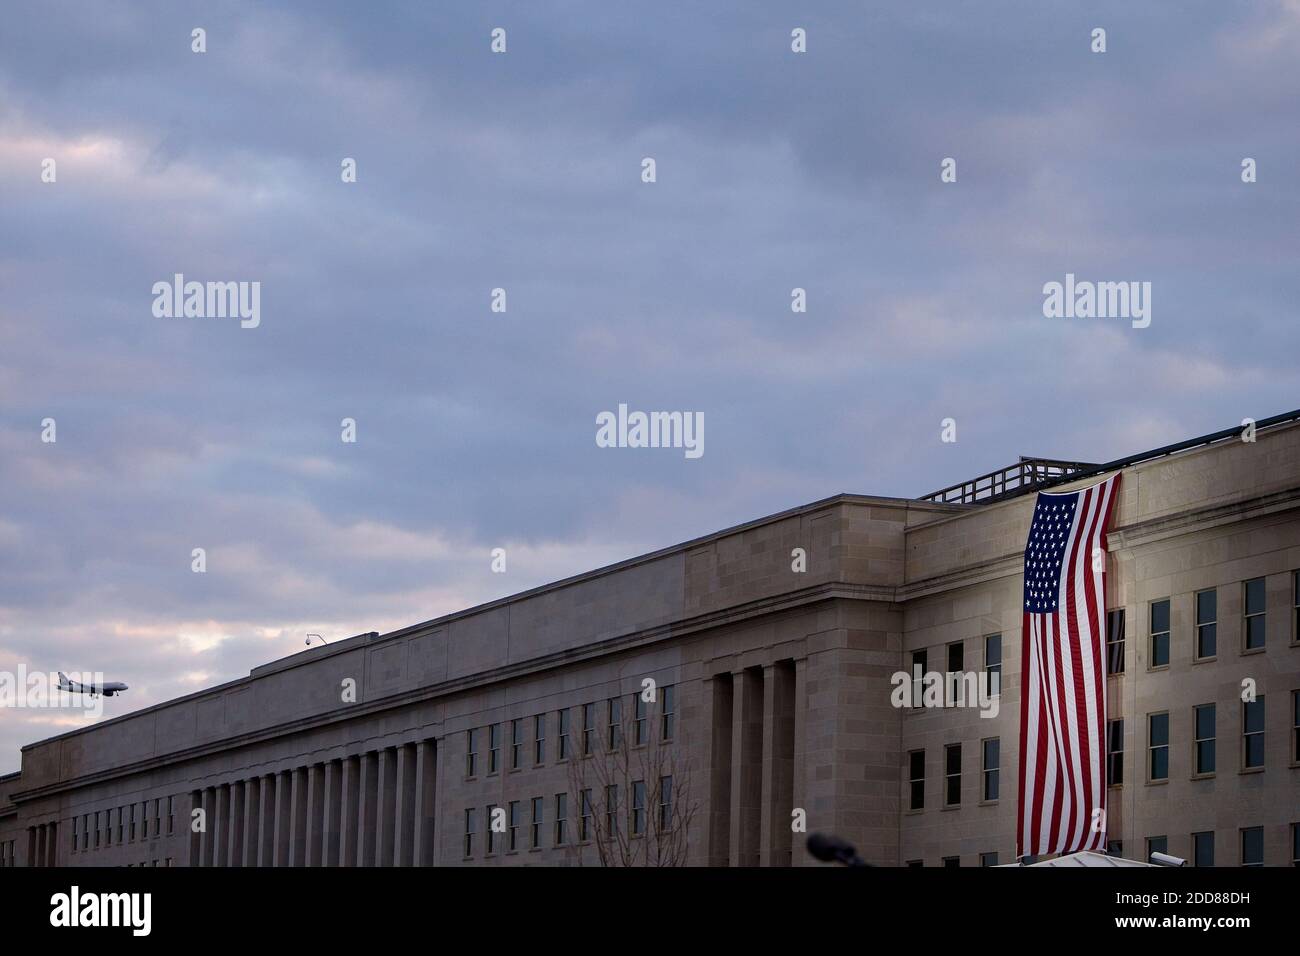 NO FILM, NO VIDEO, NO TV, NO DOCUMENTARY - An American flag hangs from the side of the Pentagon on the seventh anniversary of the attacks of September 2001, on September 11, 2008. Photo by Chuck Kennedy/MCT/ABACAPRESS.COM Stock Photo